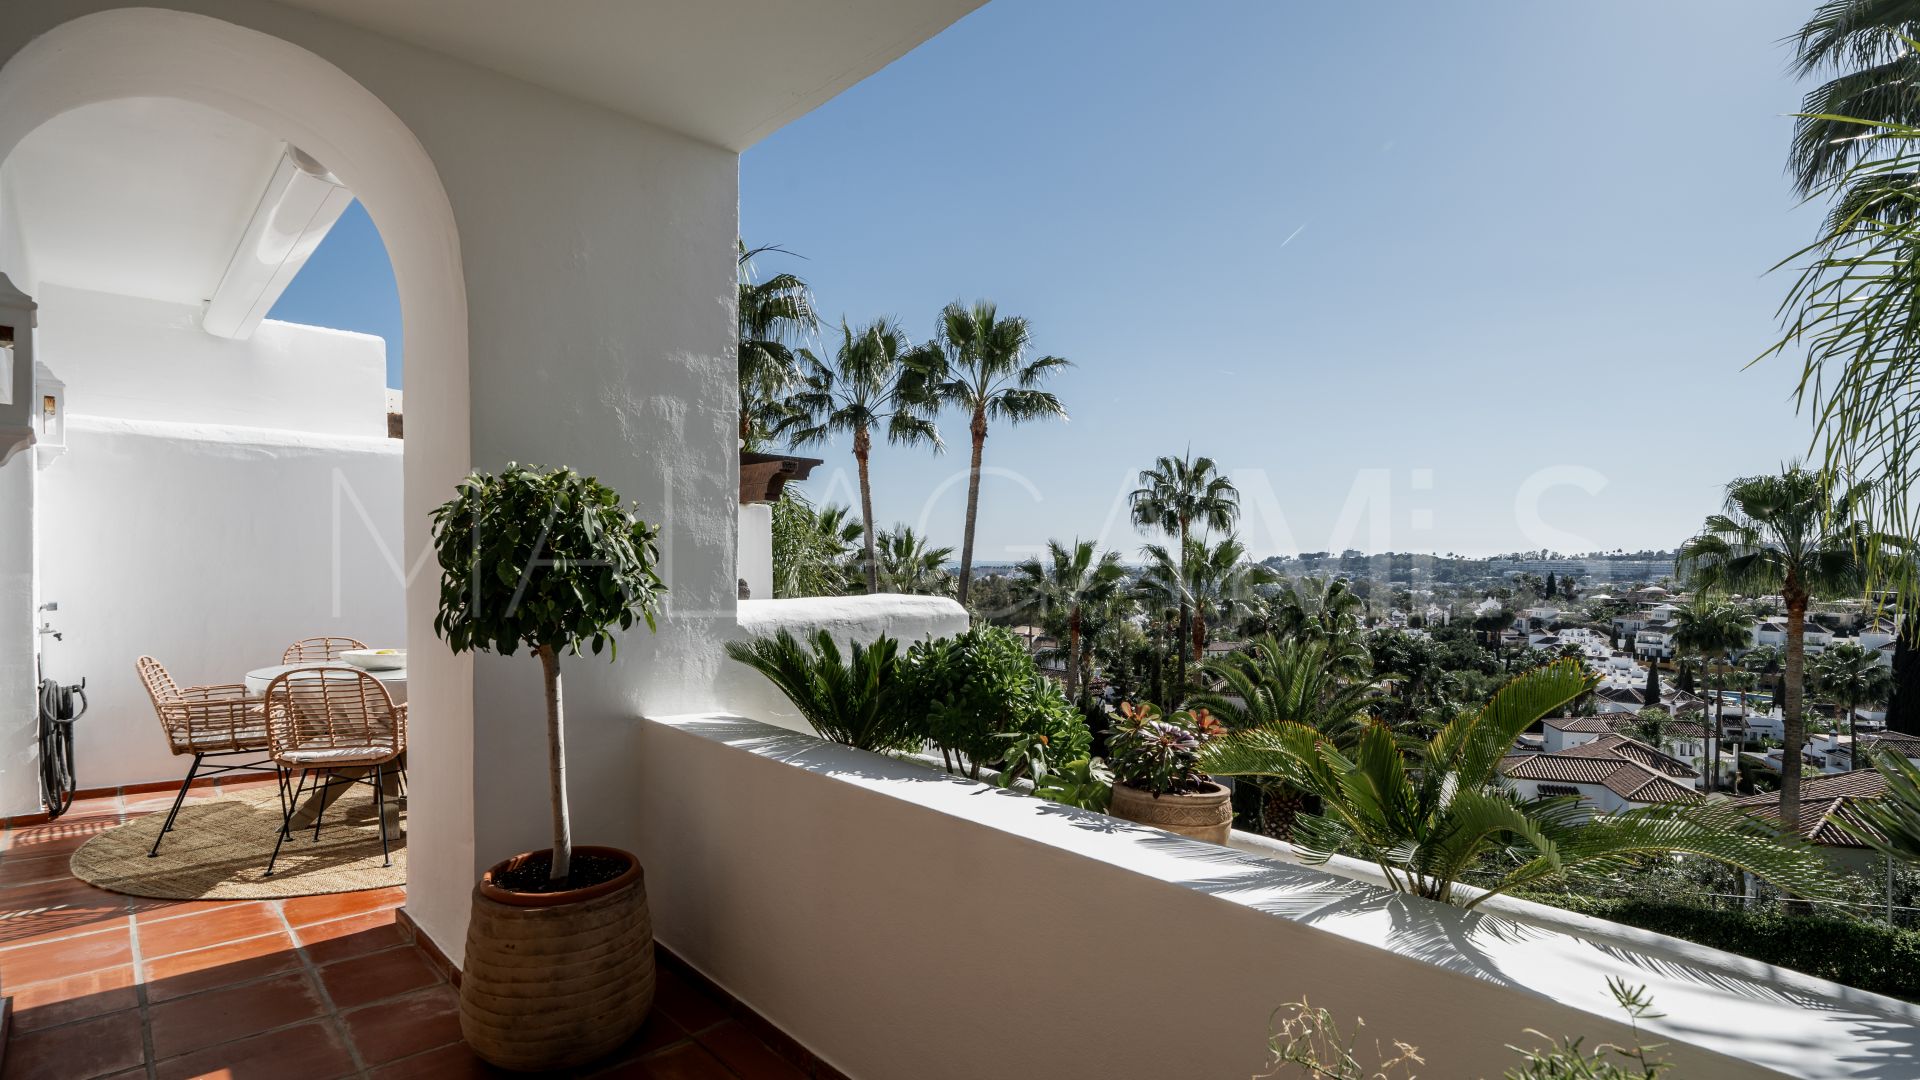 Casa for sale with 3 bedrooms in Nueva Andalucia